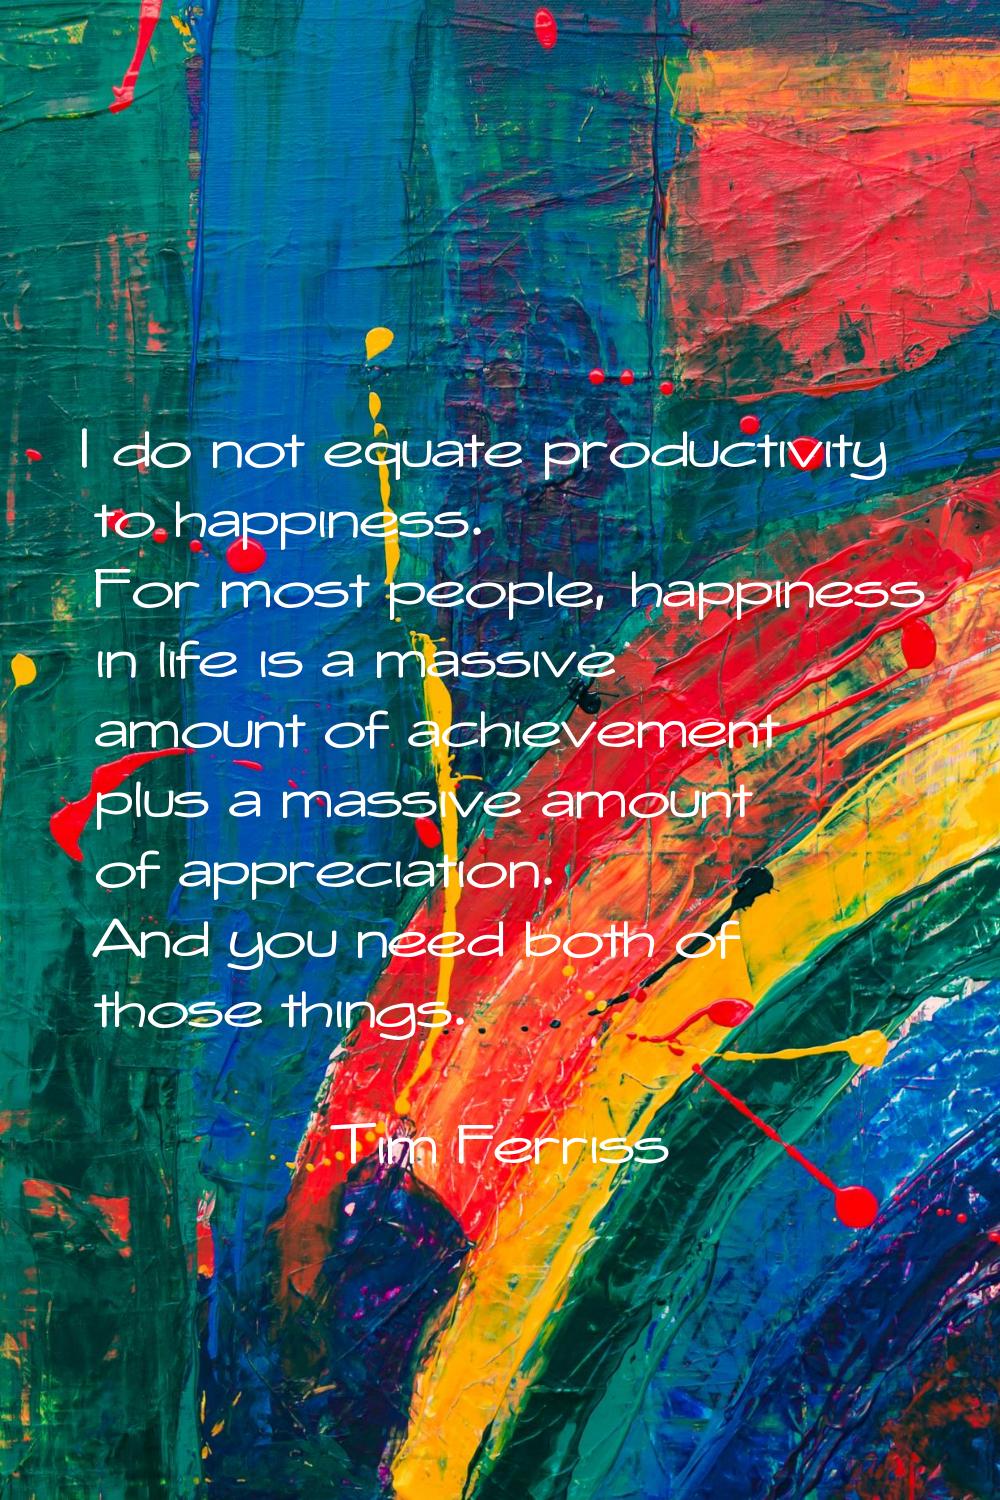 I do not equate productivity to happiness. For most people, happiness in life is a massive amount o